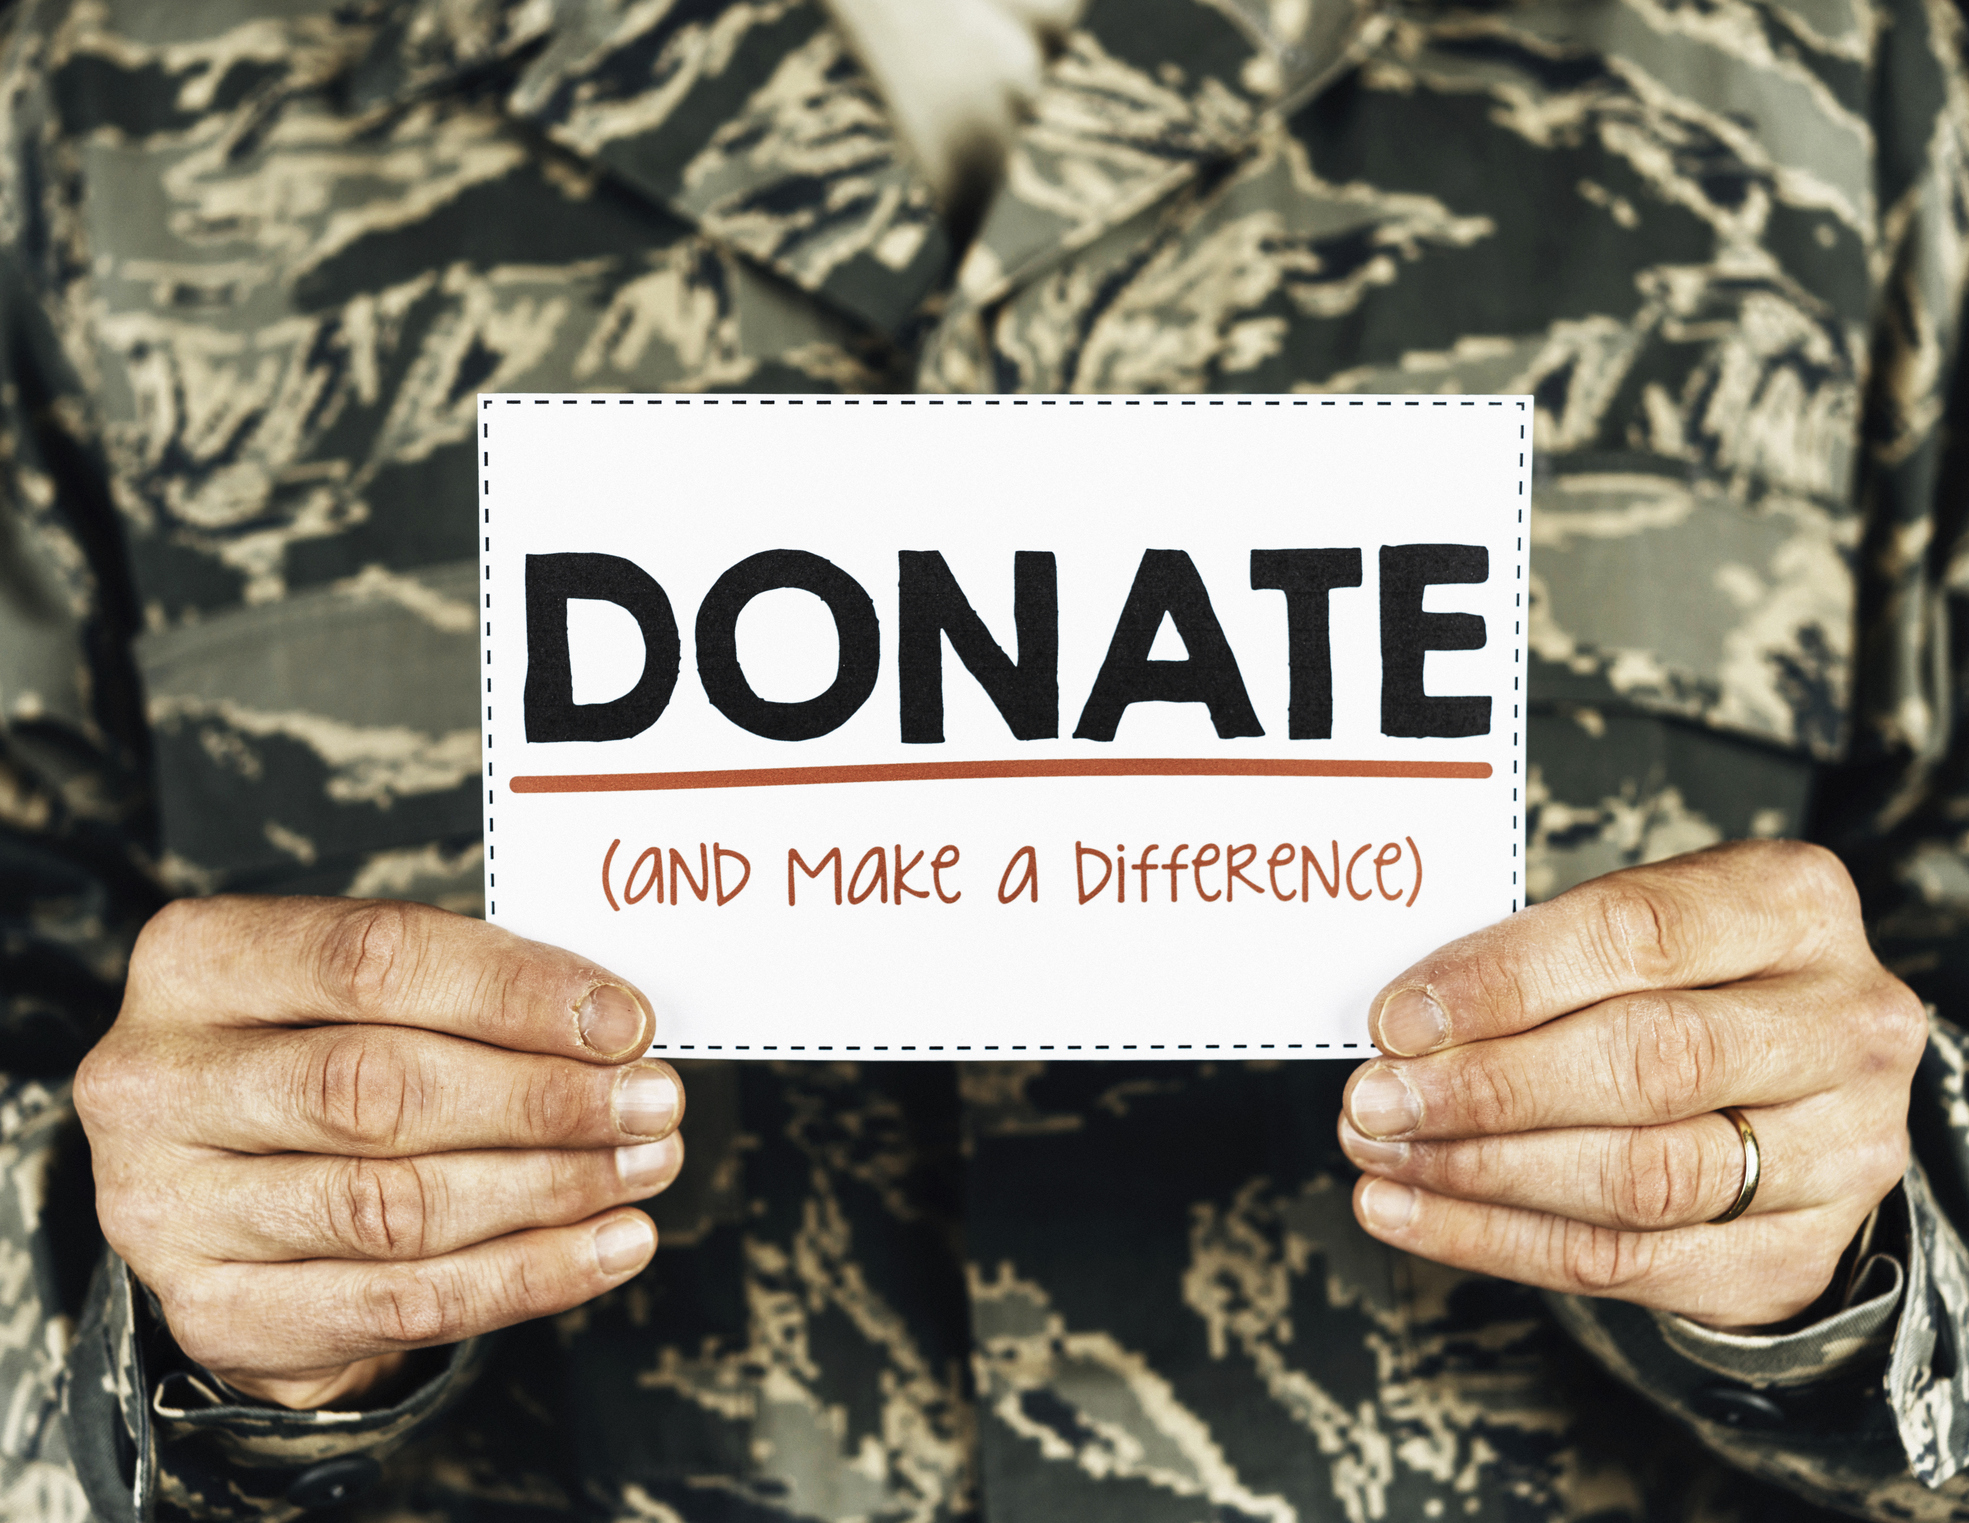 Military service member with donate sign